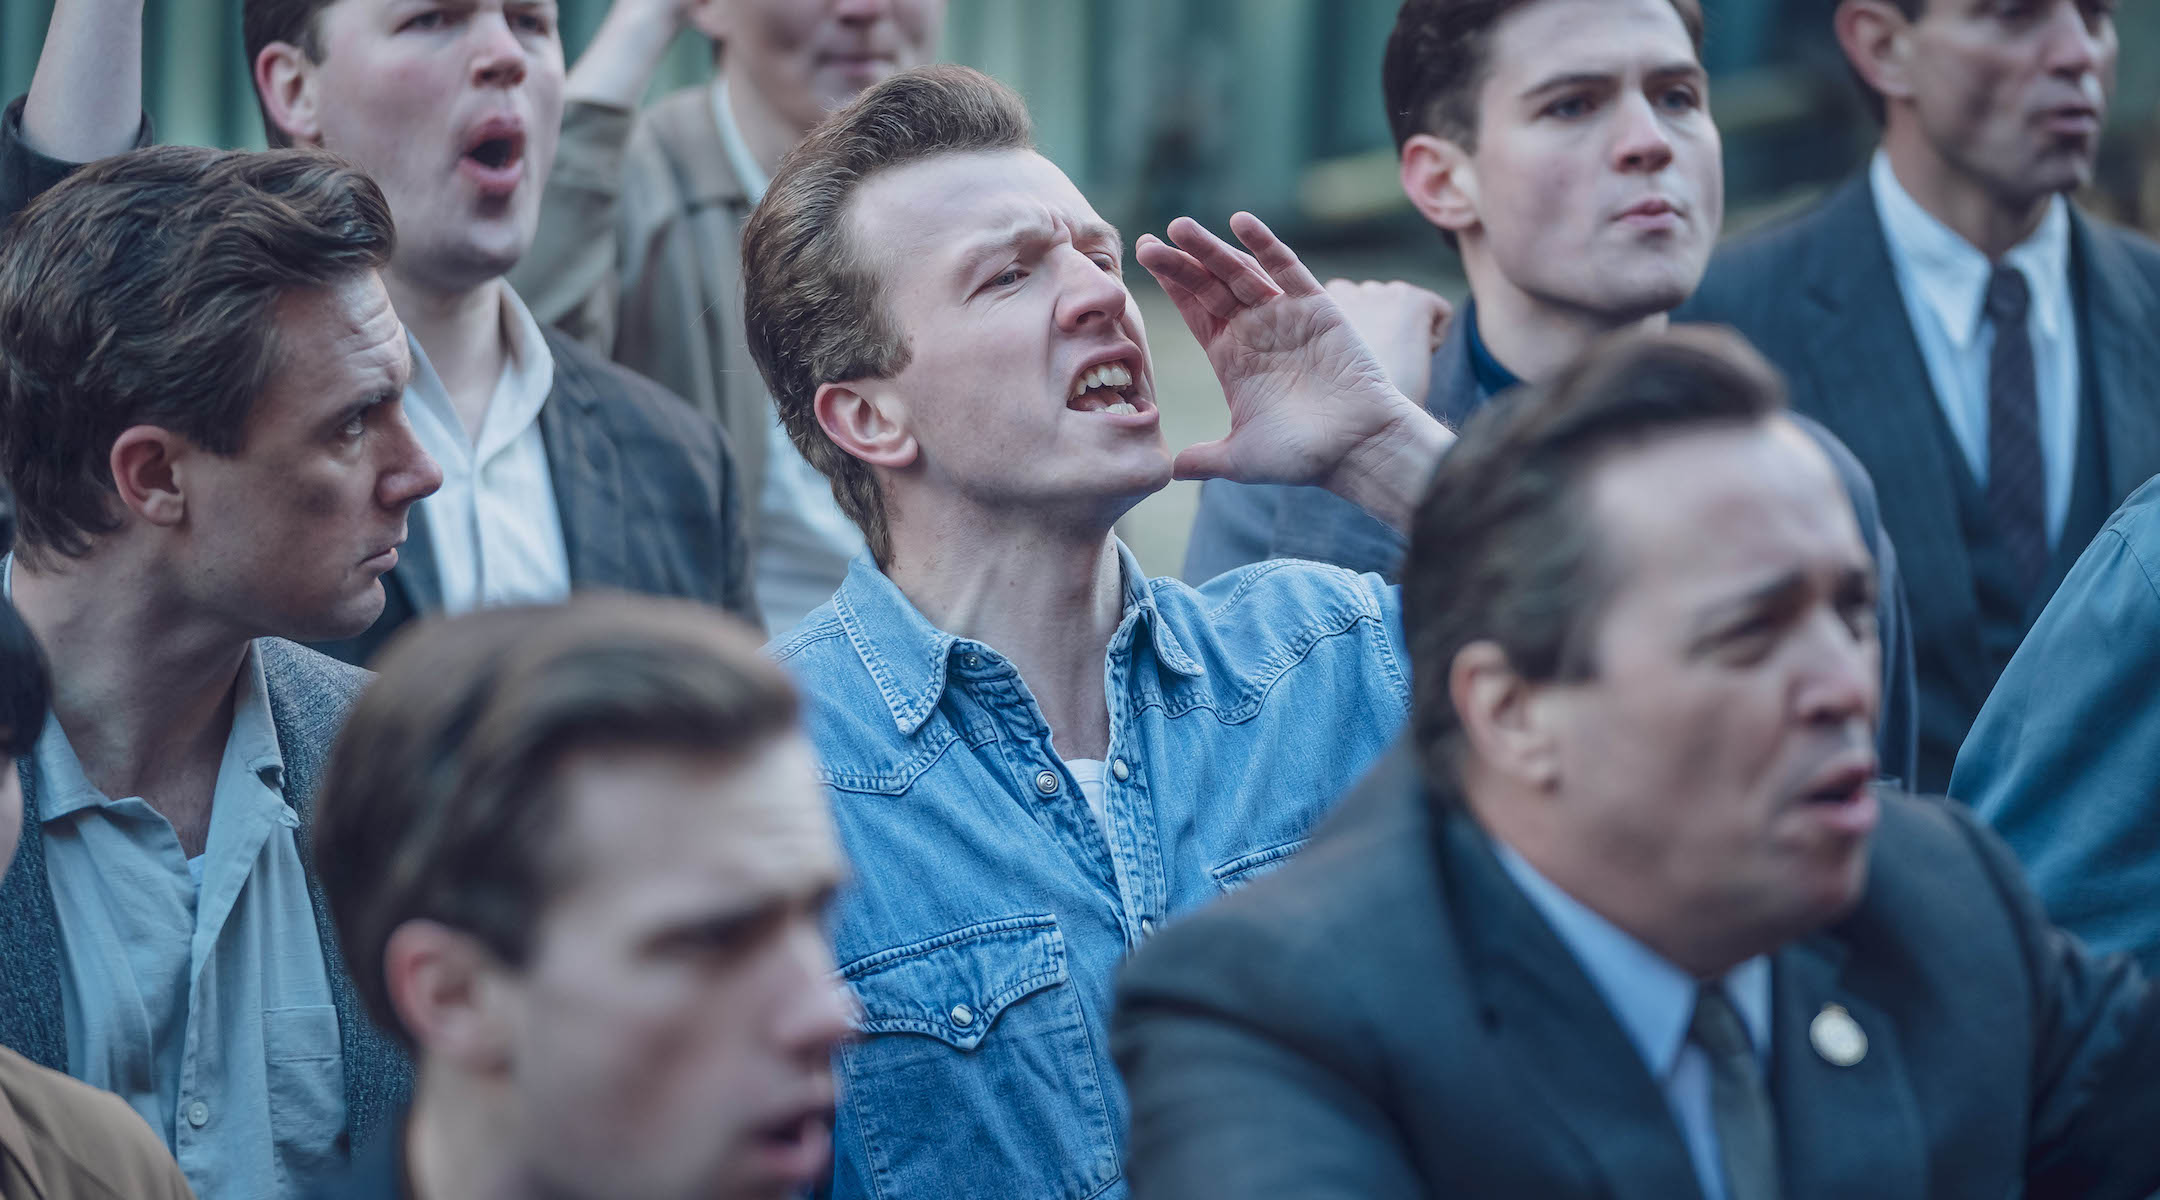 A man shouting in a crowd